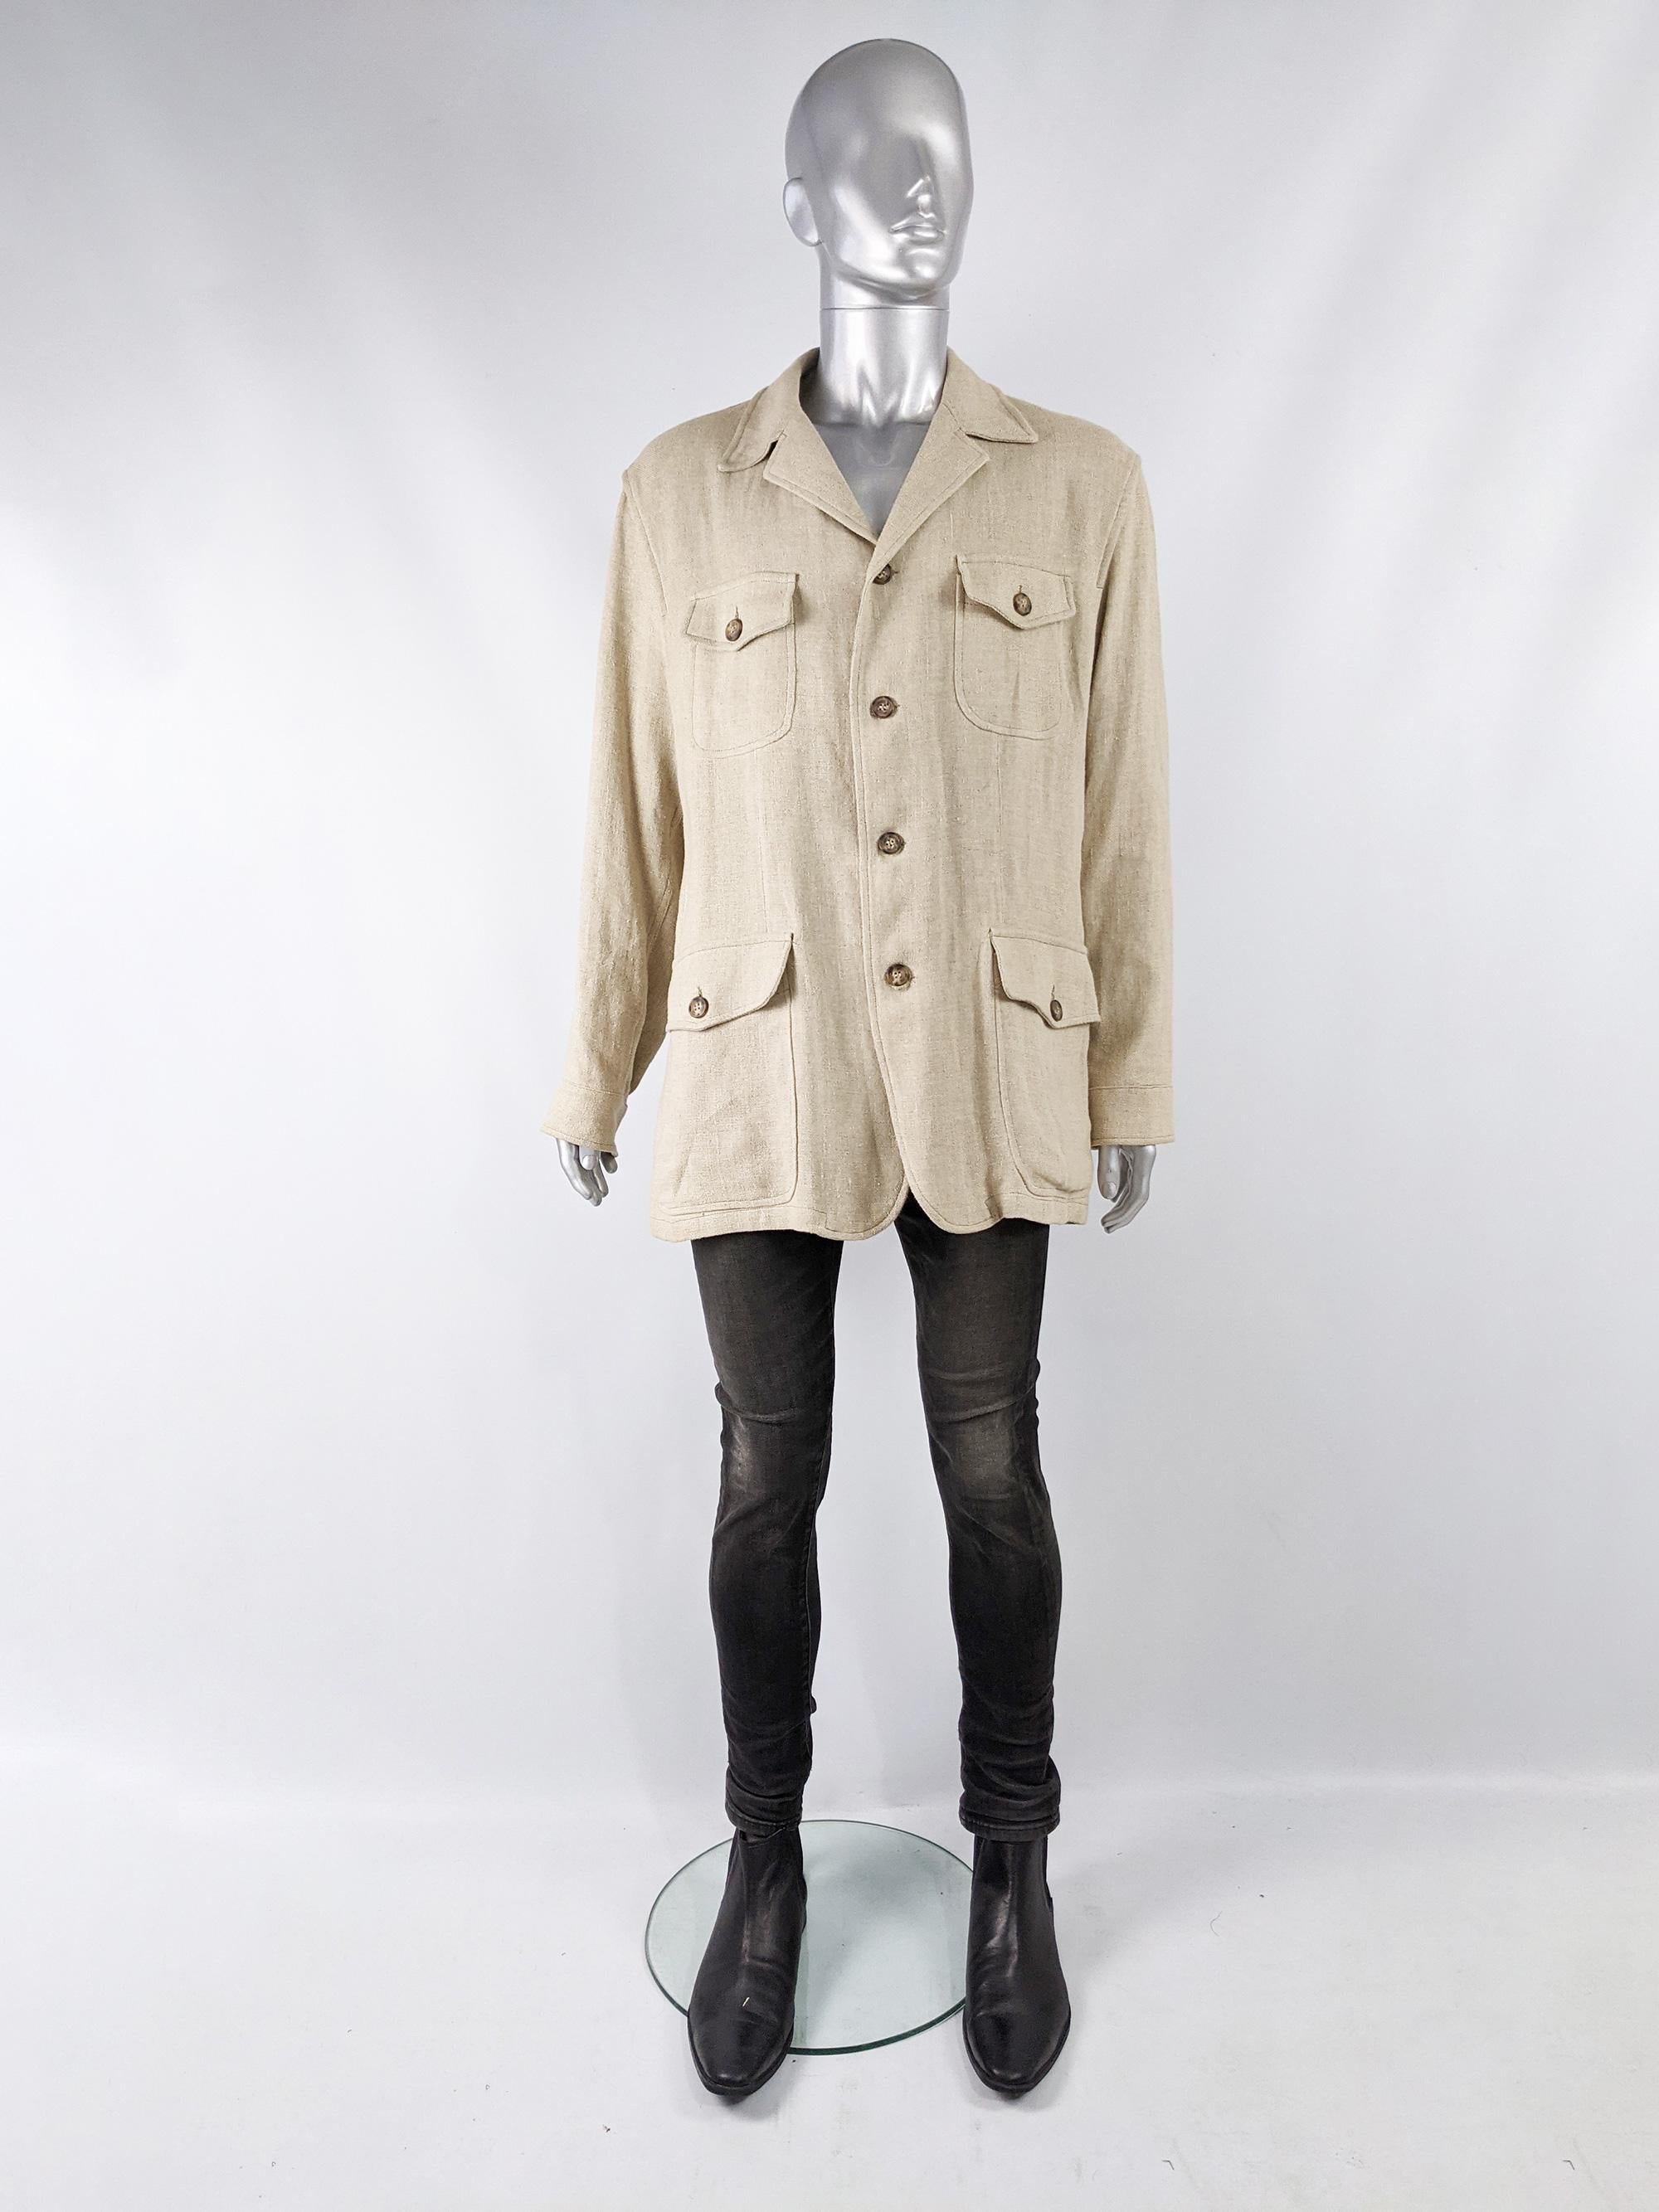 A stylish vintage mens Kenzo jacket in a cream linen with utility pockets that lend it a 1970s safari style look.

Size: Marked XL
Chest - 44” / 112cm
Waist - 40” / 101cm
Length (Shoulder to Hem) - 30” / 76cm
Shoulder to Shoulder - 19” / 48cm
Sleeve